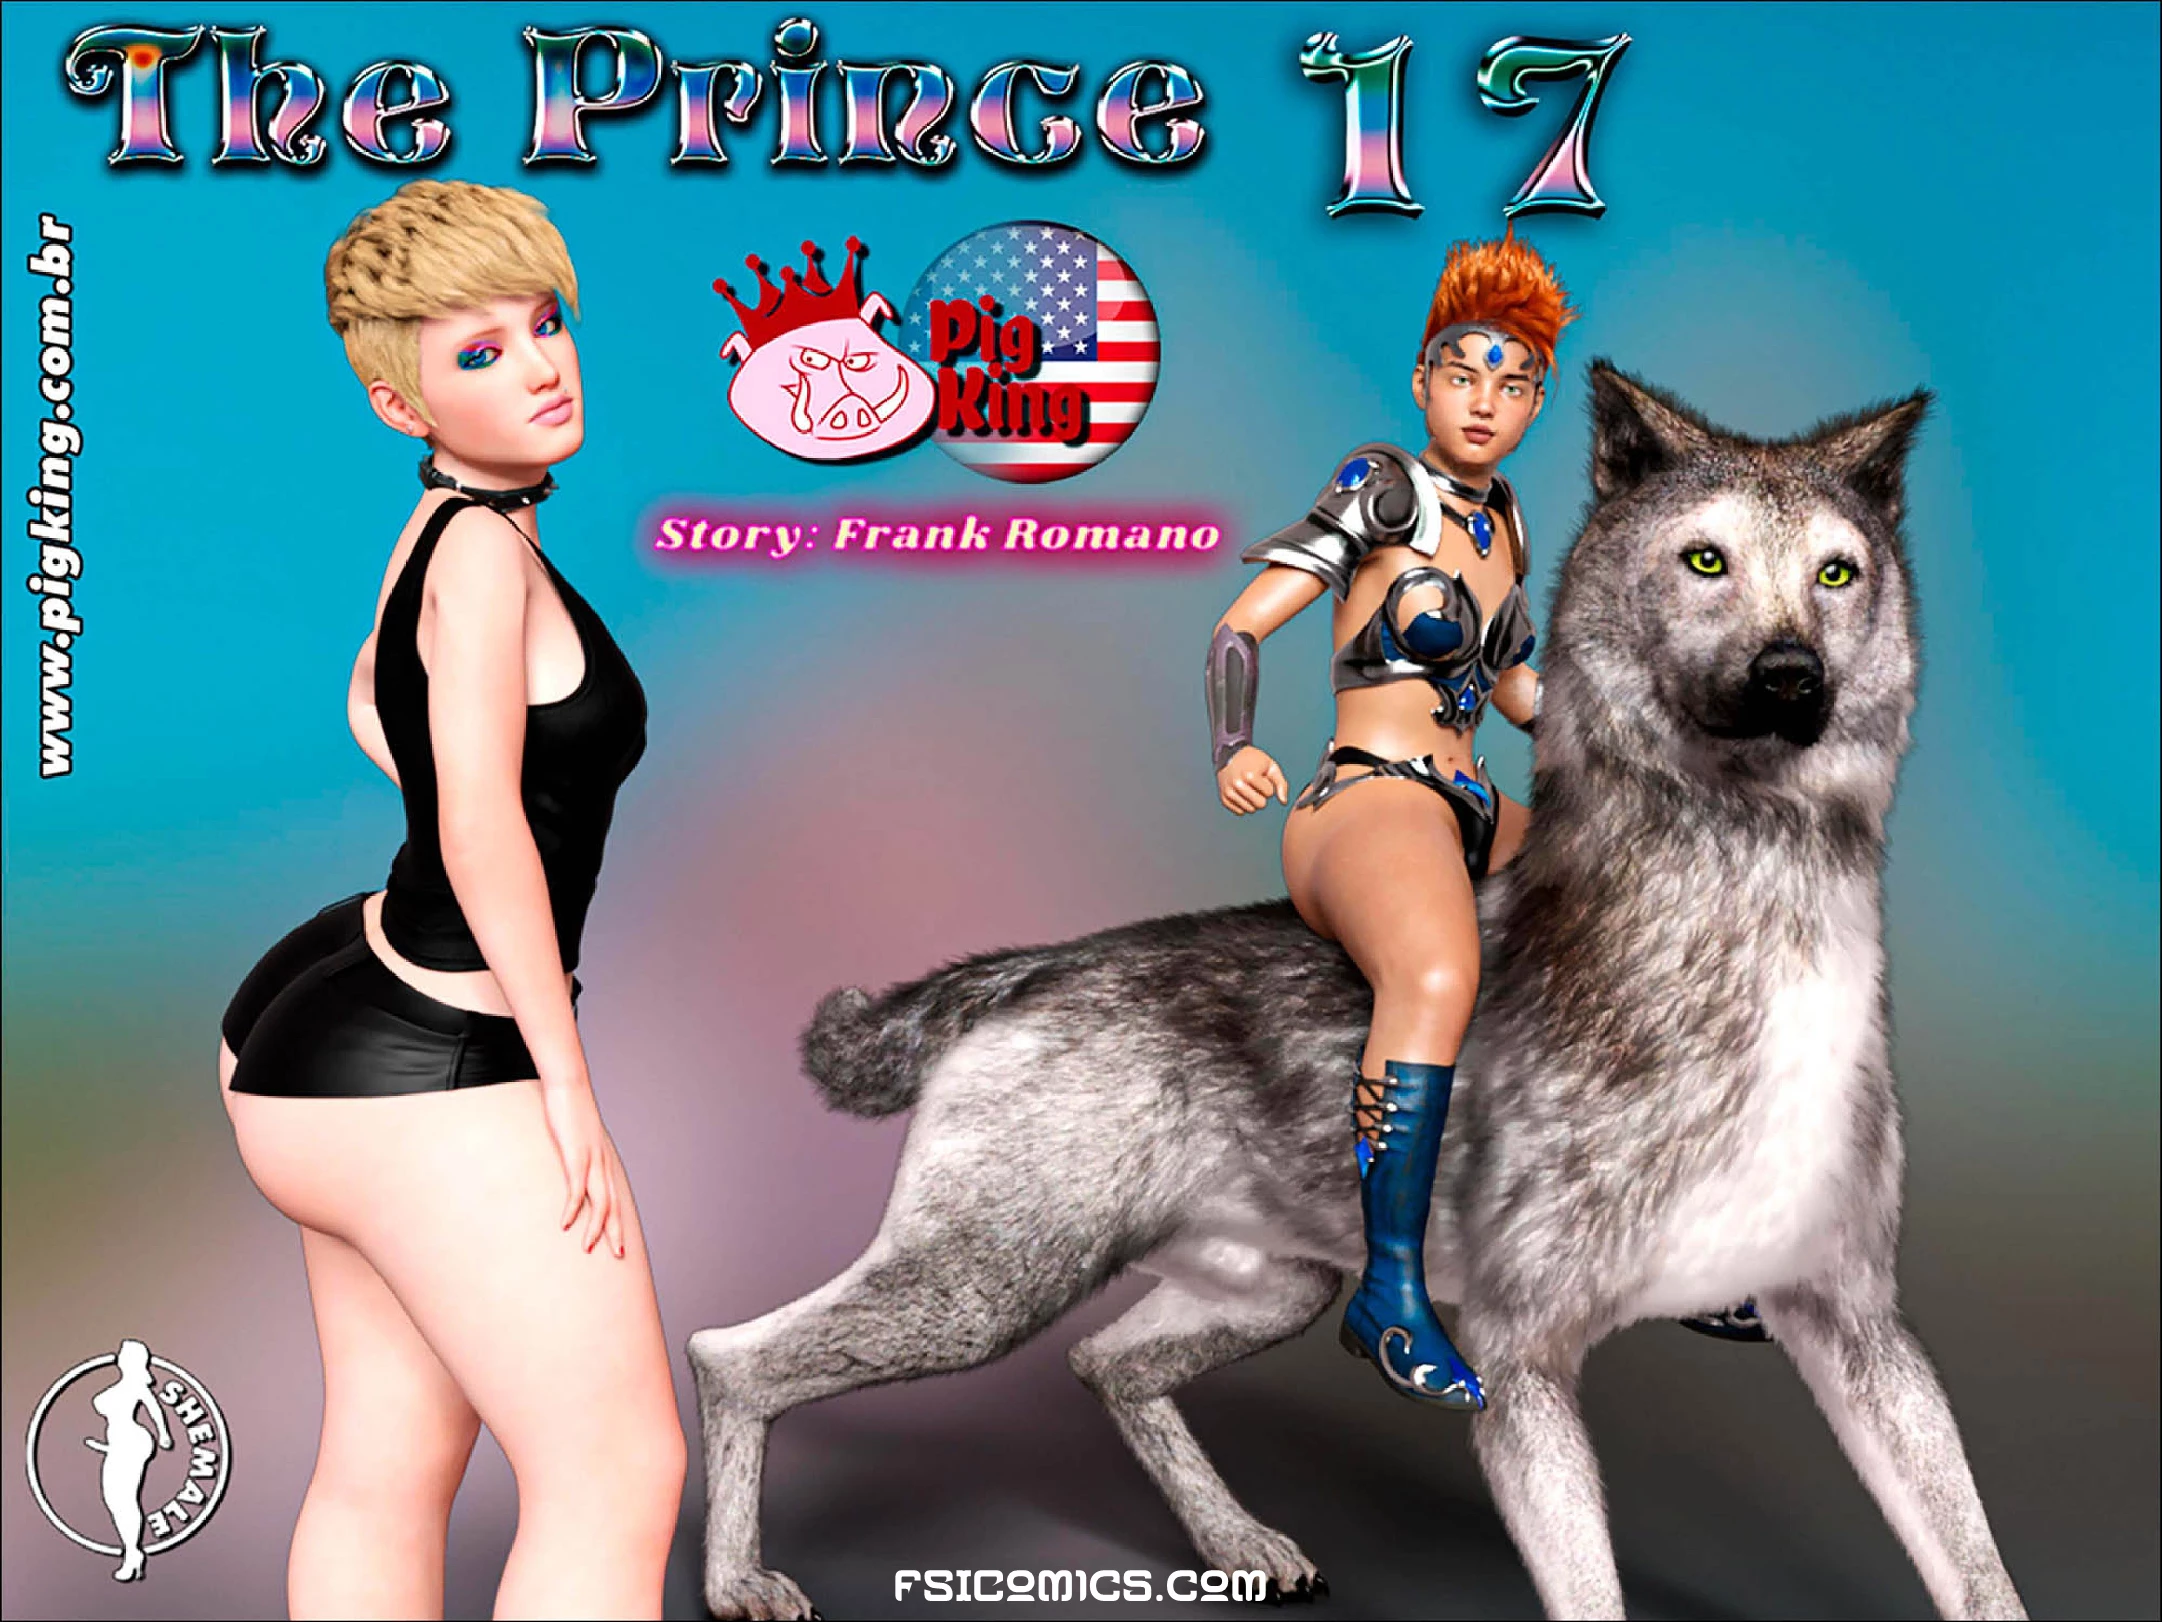 The Prince Chapter 17 – PigKing - 200 - FSIComics